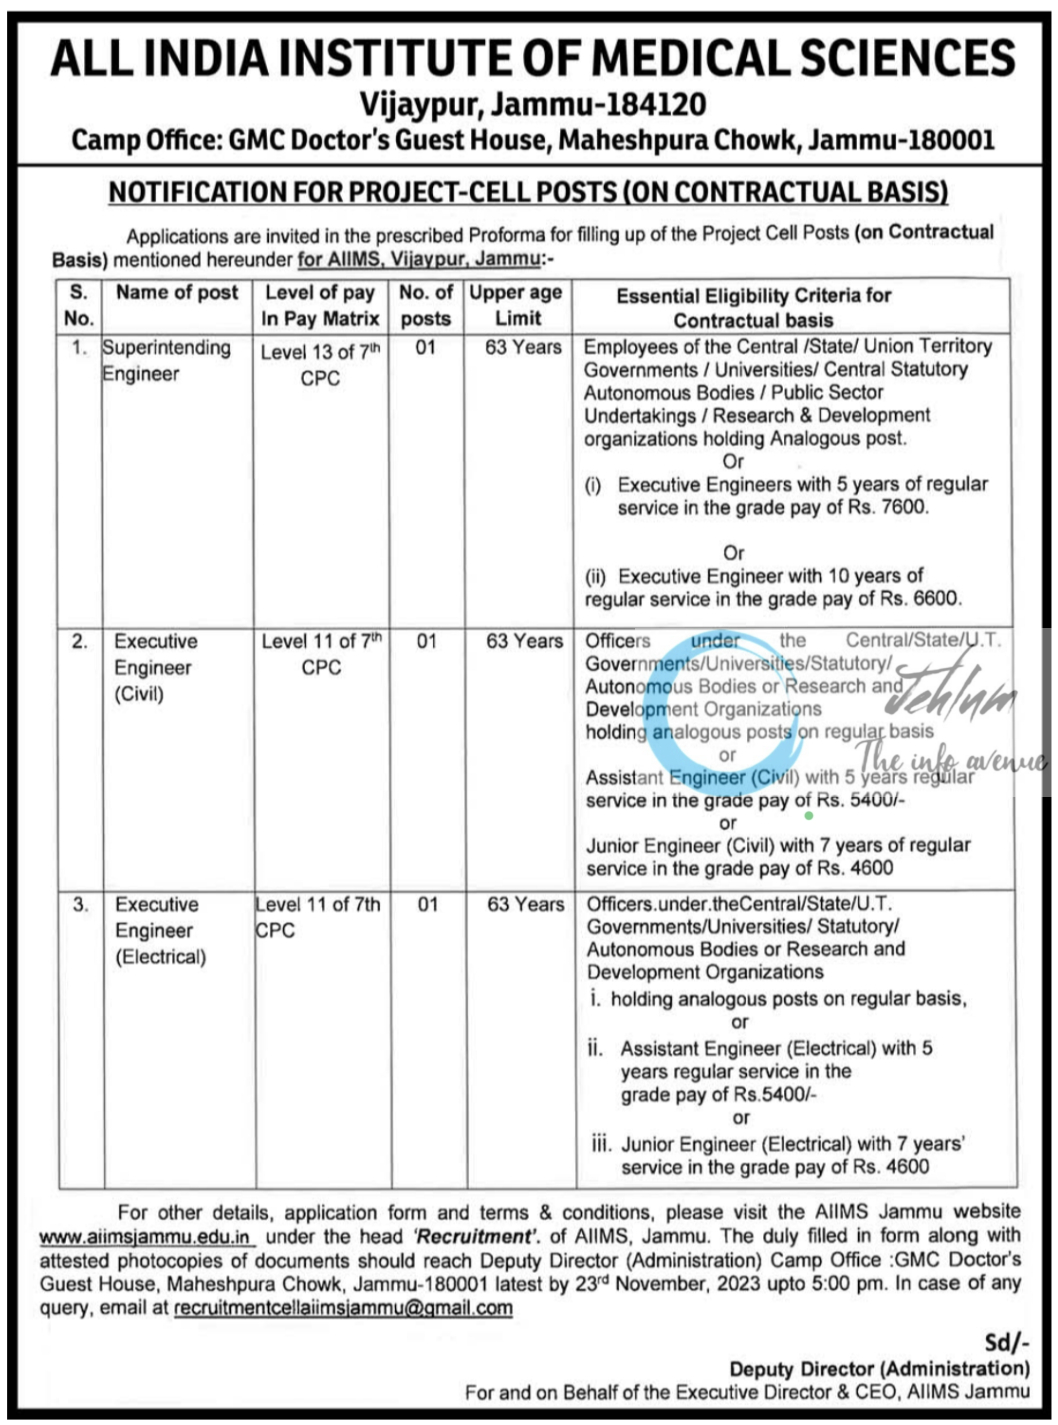 AIIMS JAMMU ADVERTISEMENT NOTIFICATION FOR PROJECT-CELL POSTS 2023